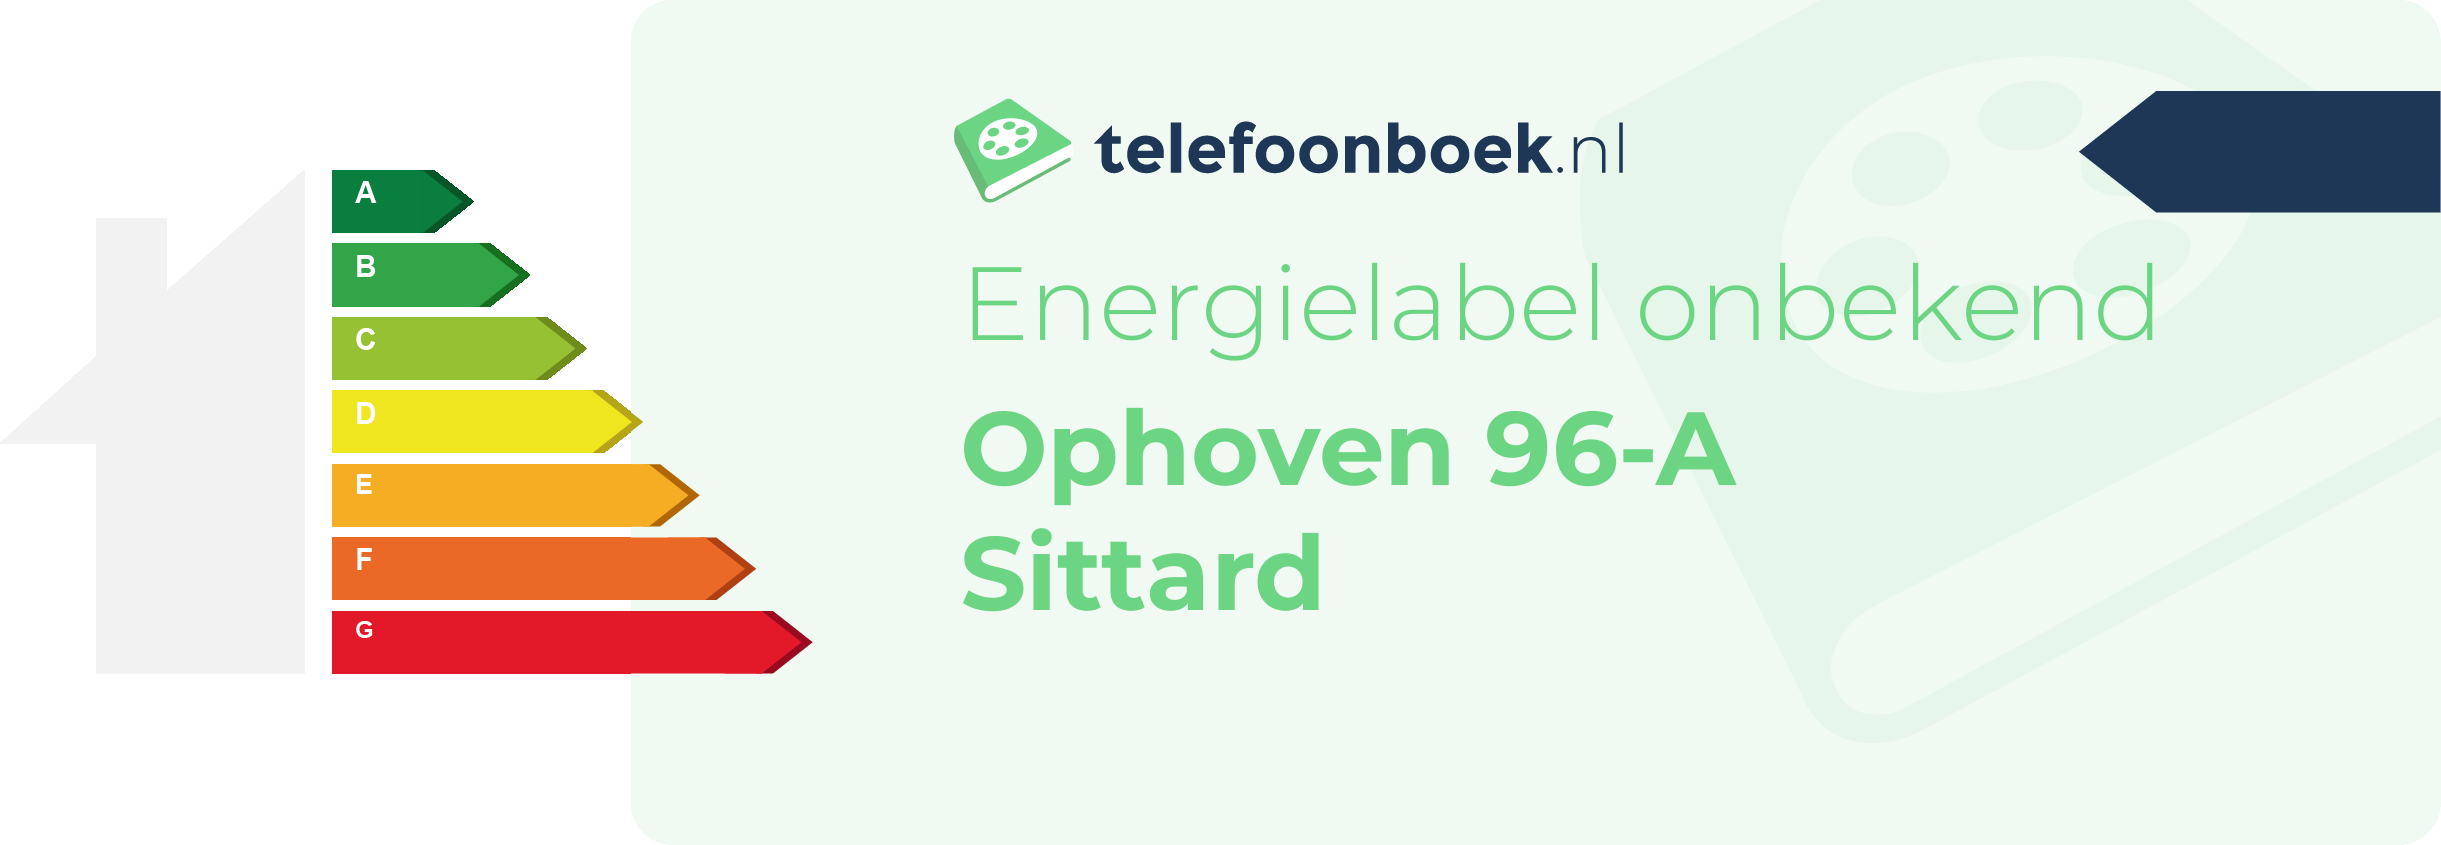 Energielabel Ophoven 96-A Sittard